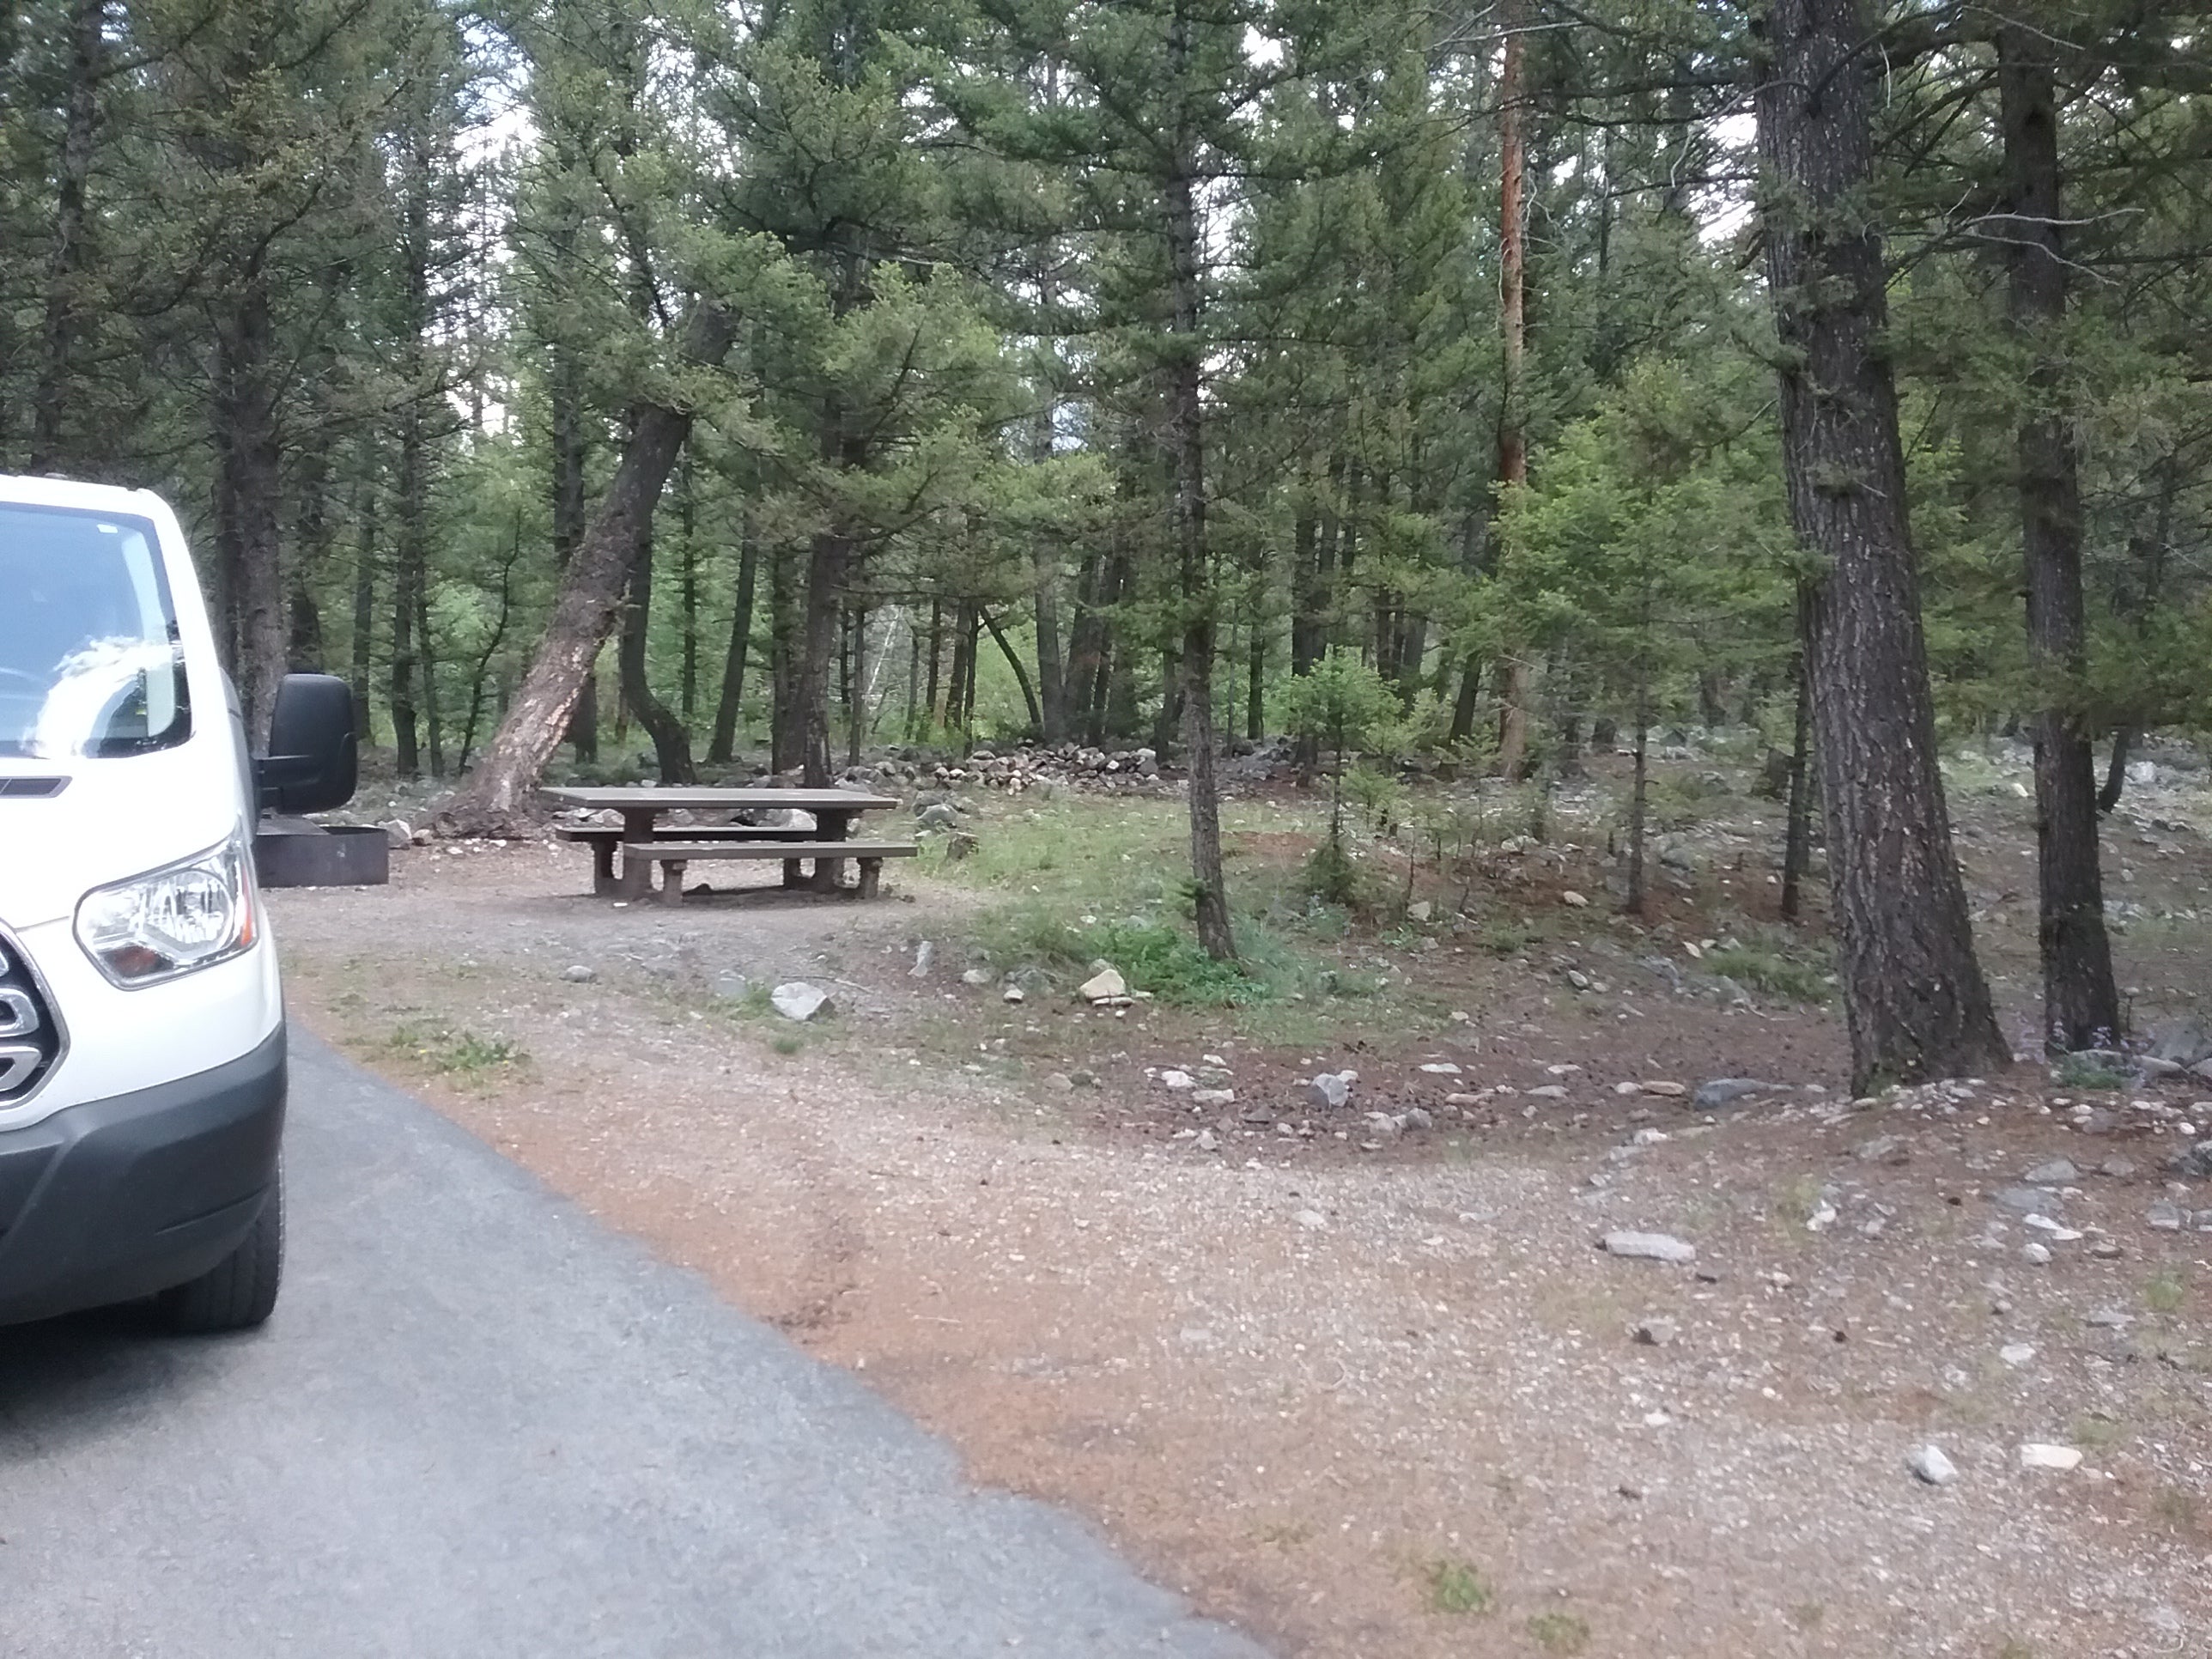 Camper submitted image from Beaverhead National Forest Pettengill Campground - 5